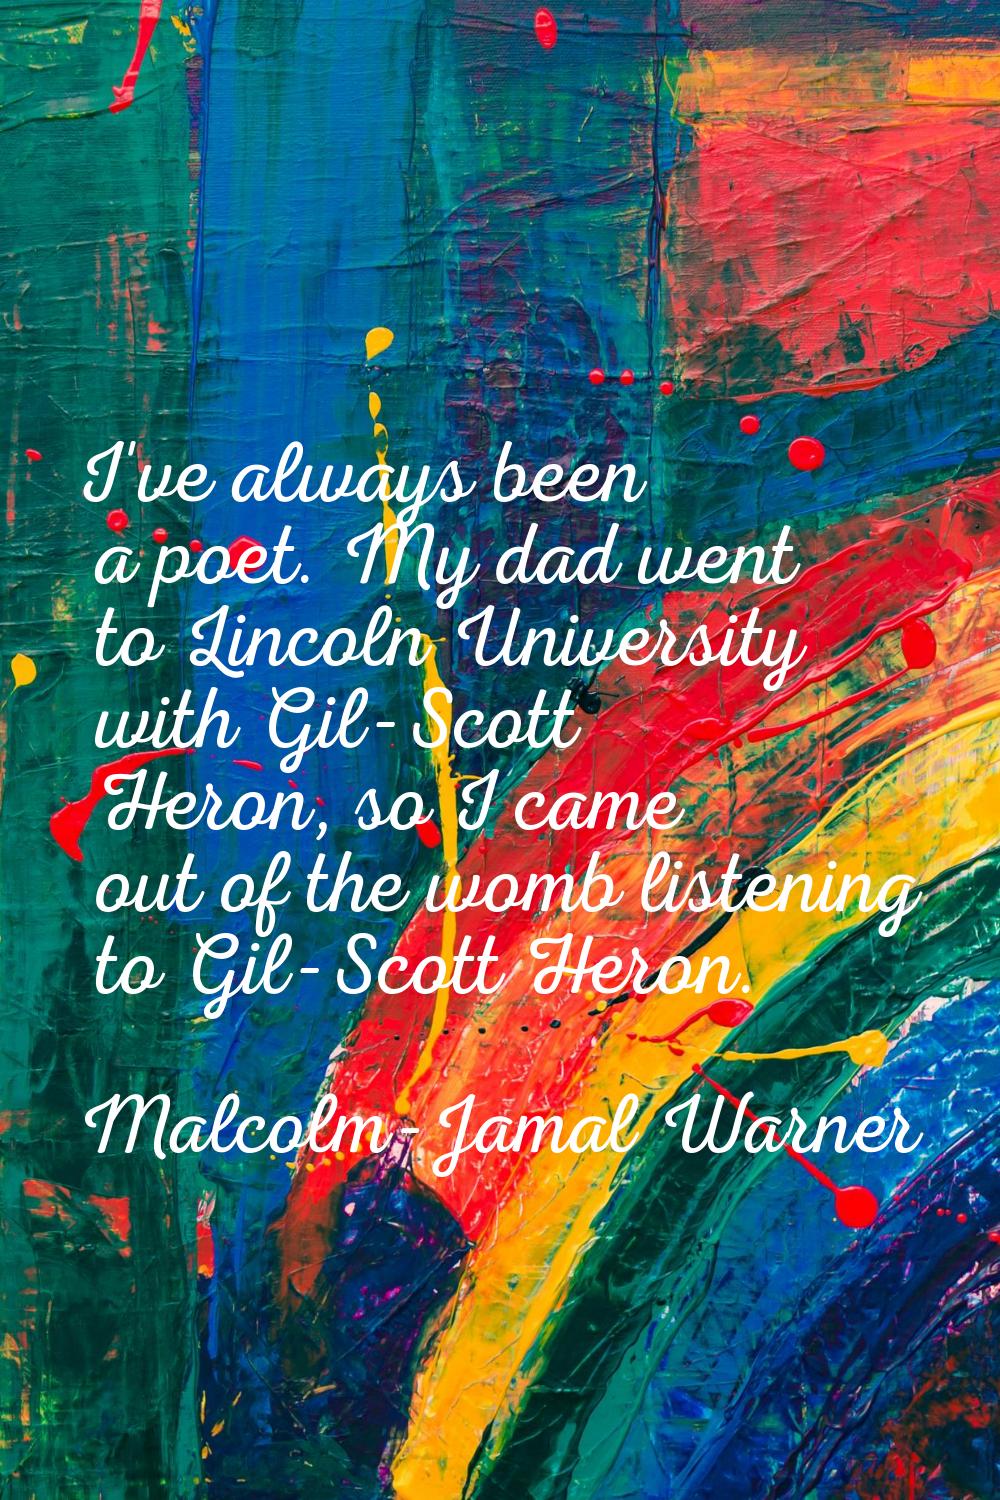 I've always been a poet. My dad went to Lincoln University with Gil-Scott Heron, so I came out of t